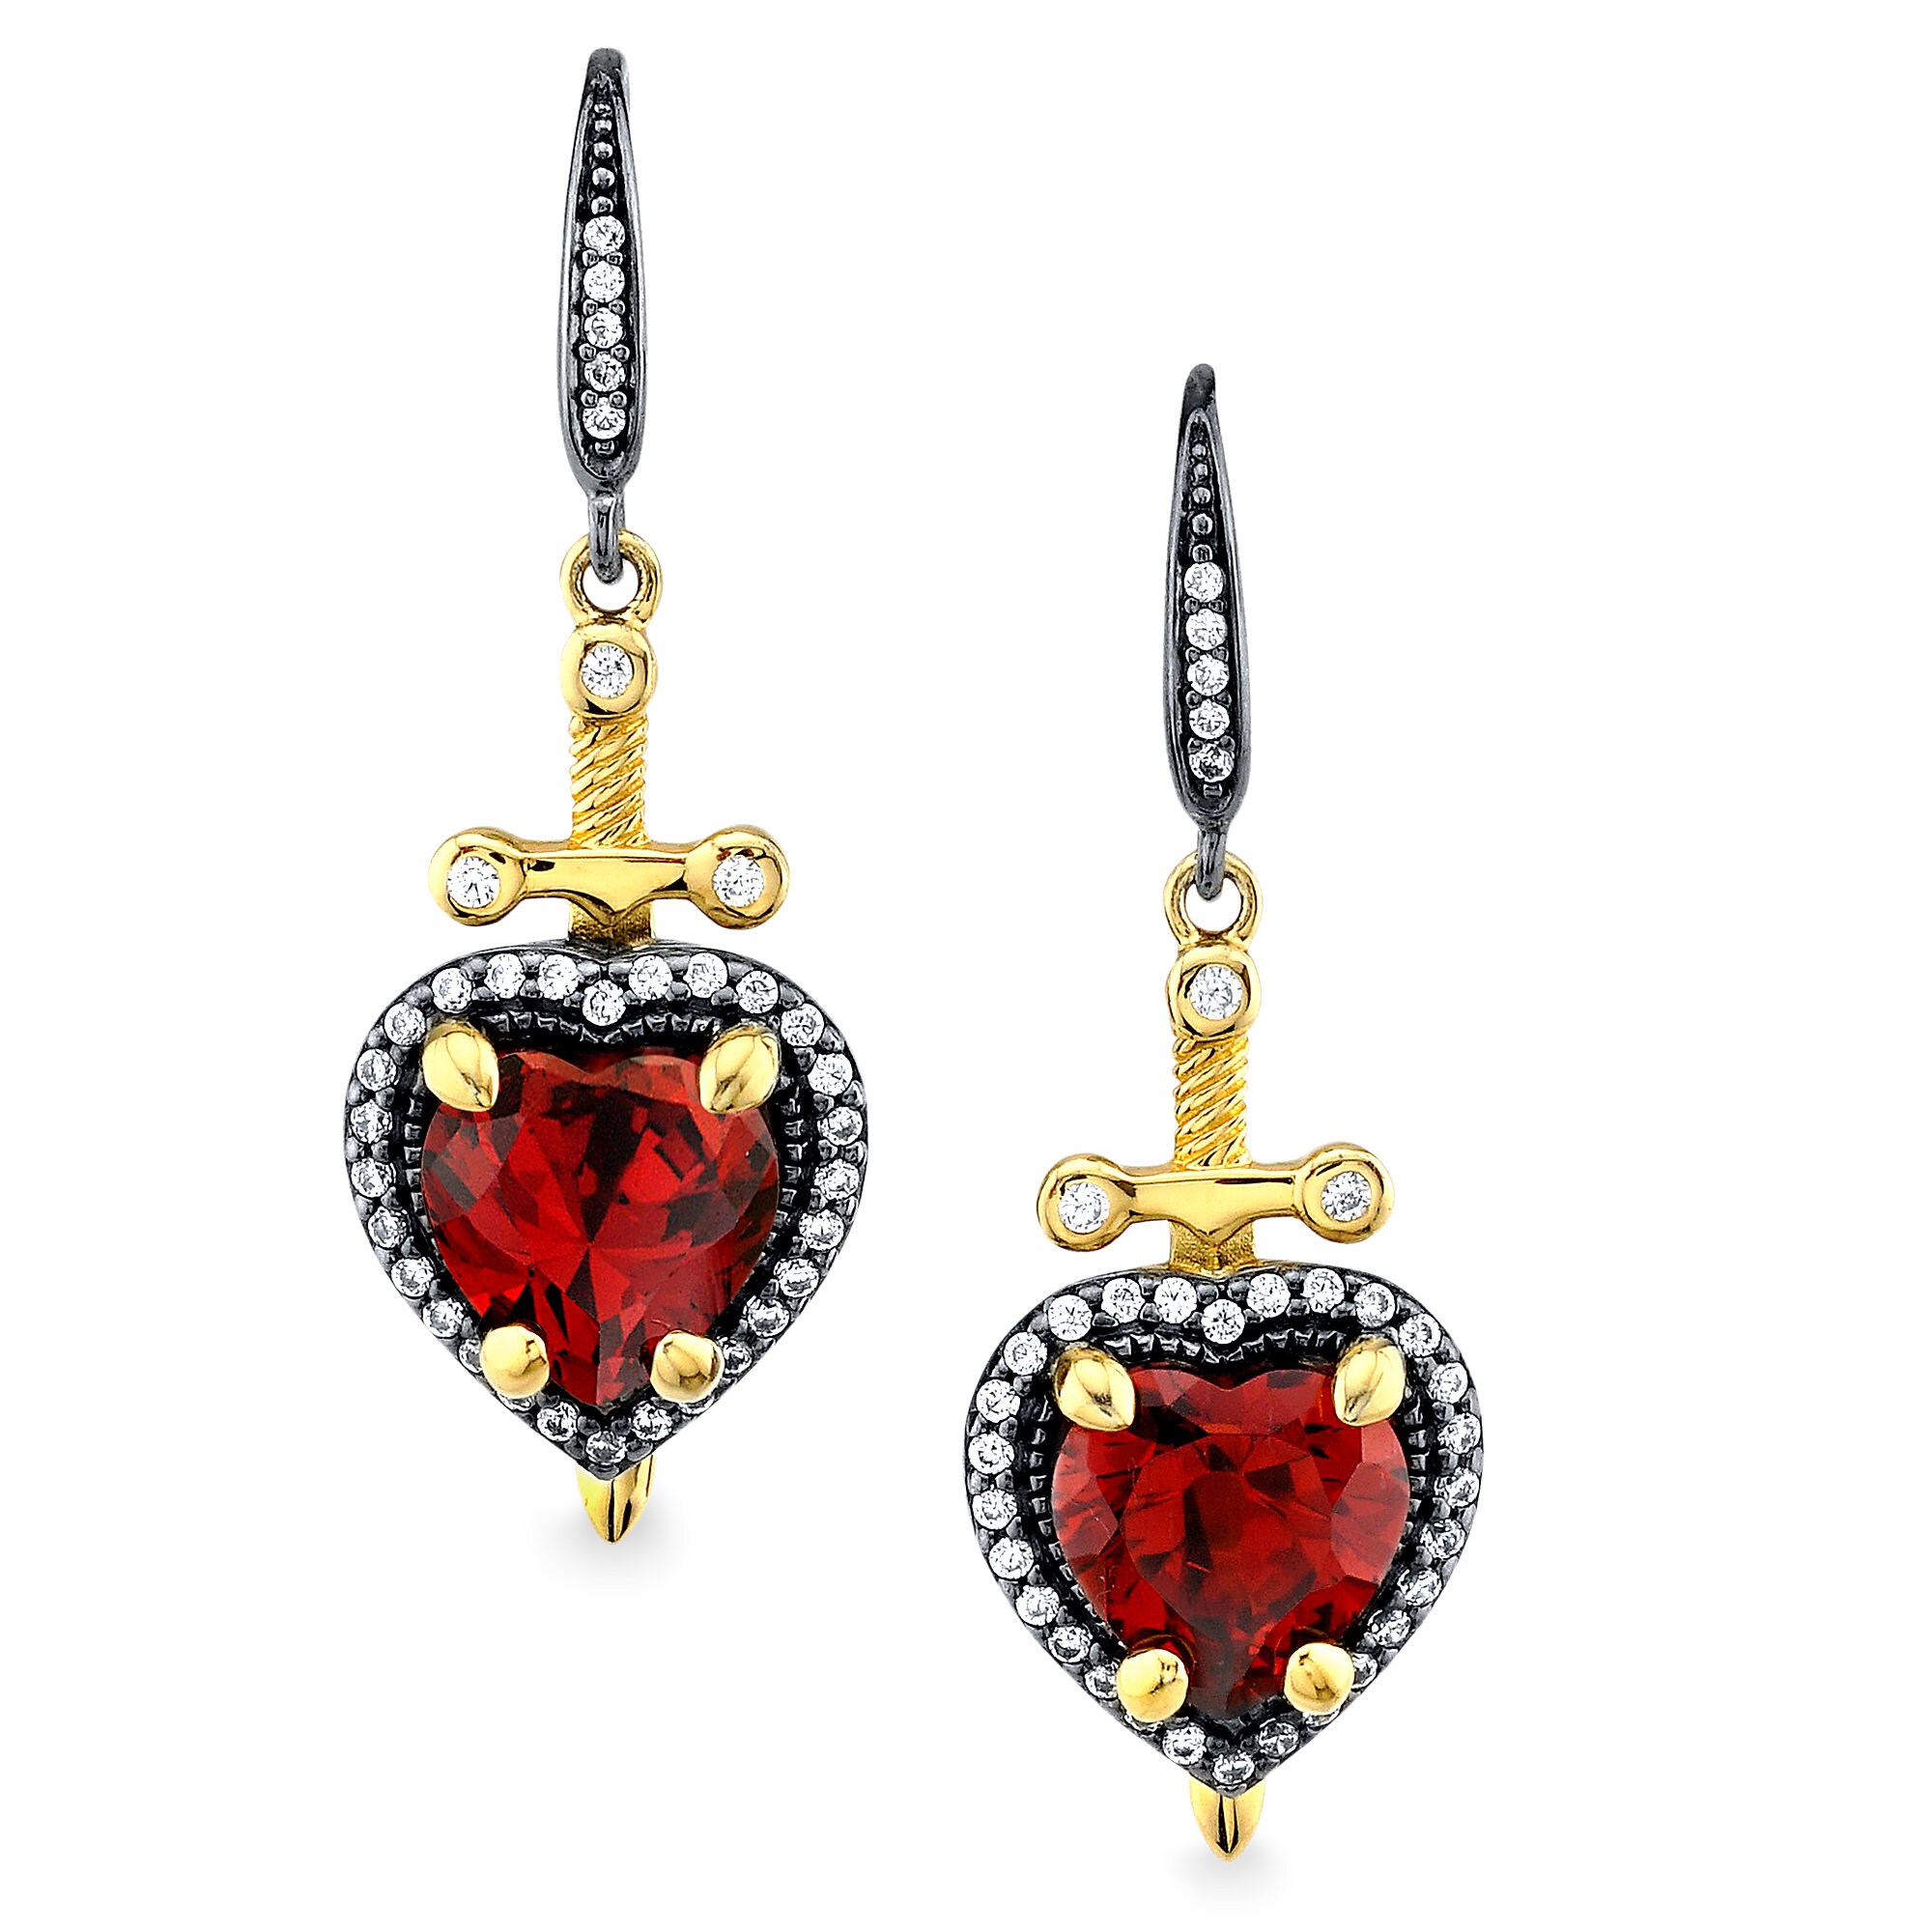 Evil Queen Dagger Heart Earrings by RockLove - Snow White and the Seven Dwarfs